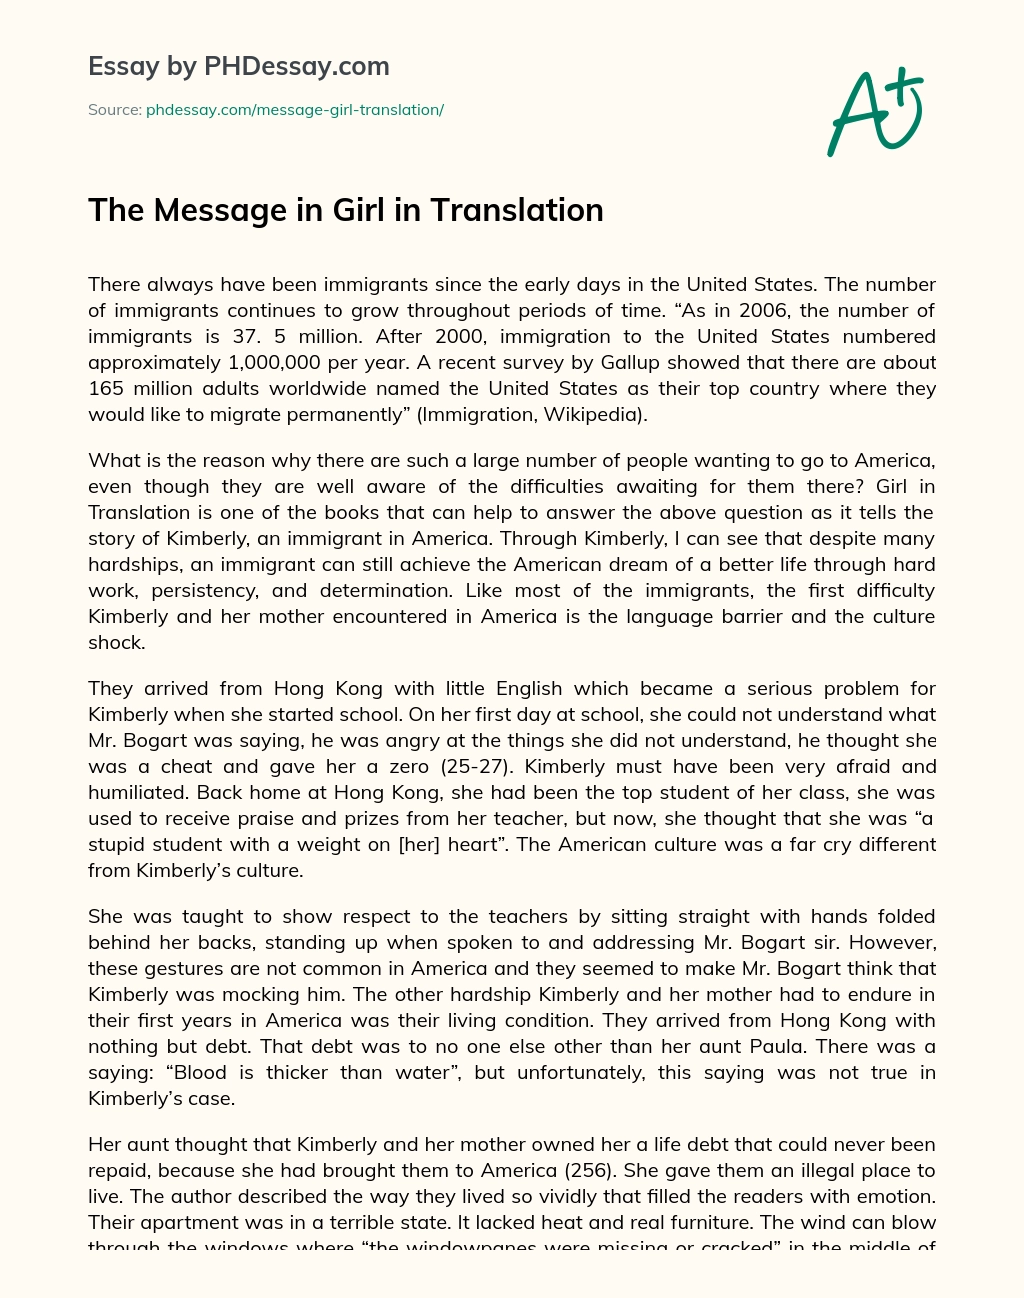 The Message in Girl in Translation essay